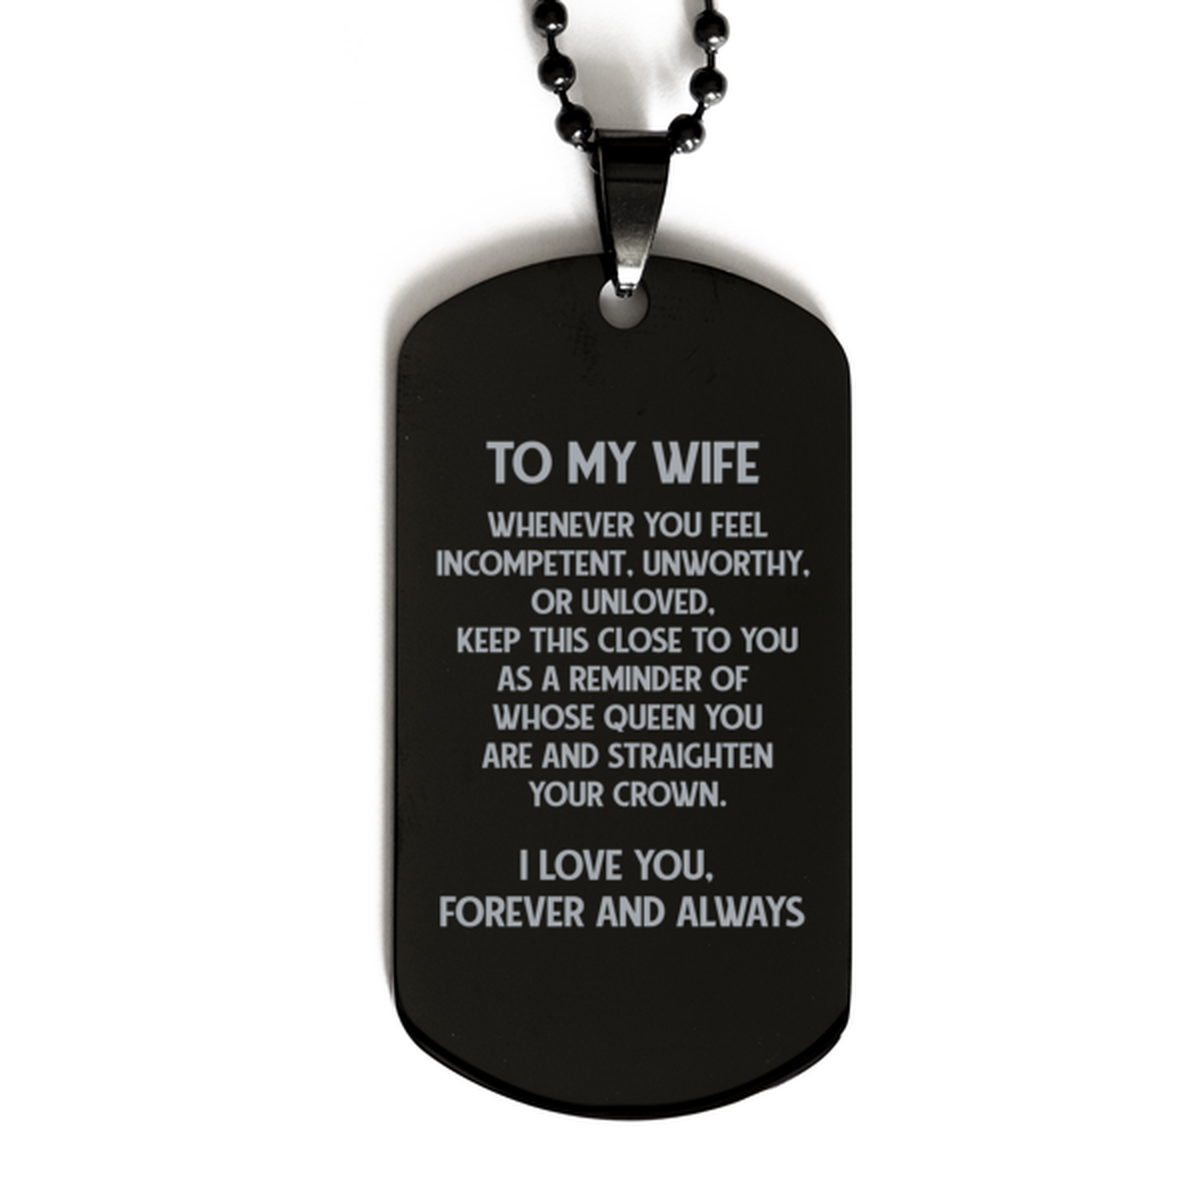 To My Wife Black Dog Tag, Whenever You Feel Incompetent, Birthday Gifts For Wife From Husband, Valentines Gifts For Women